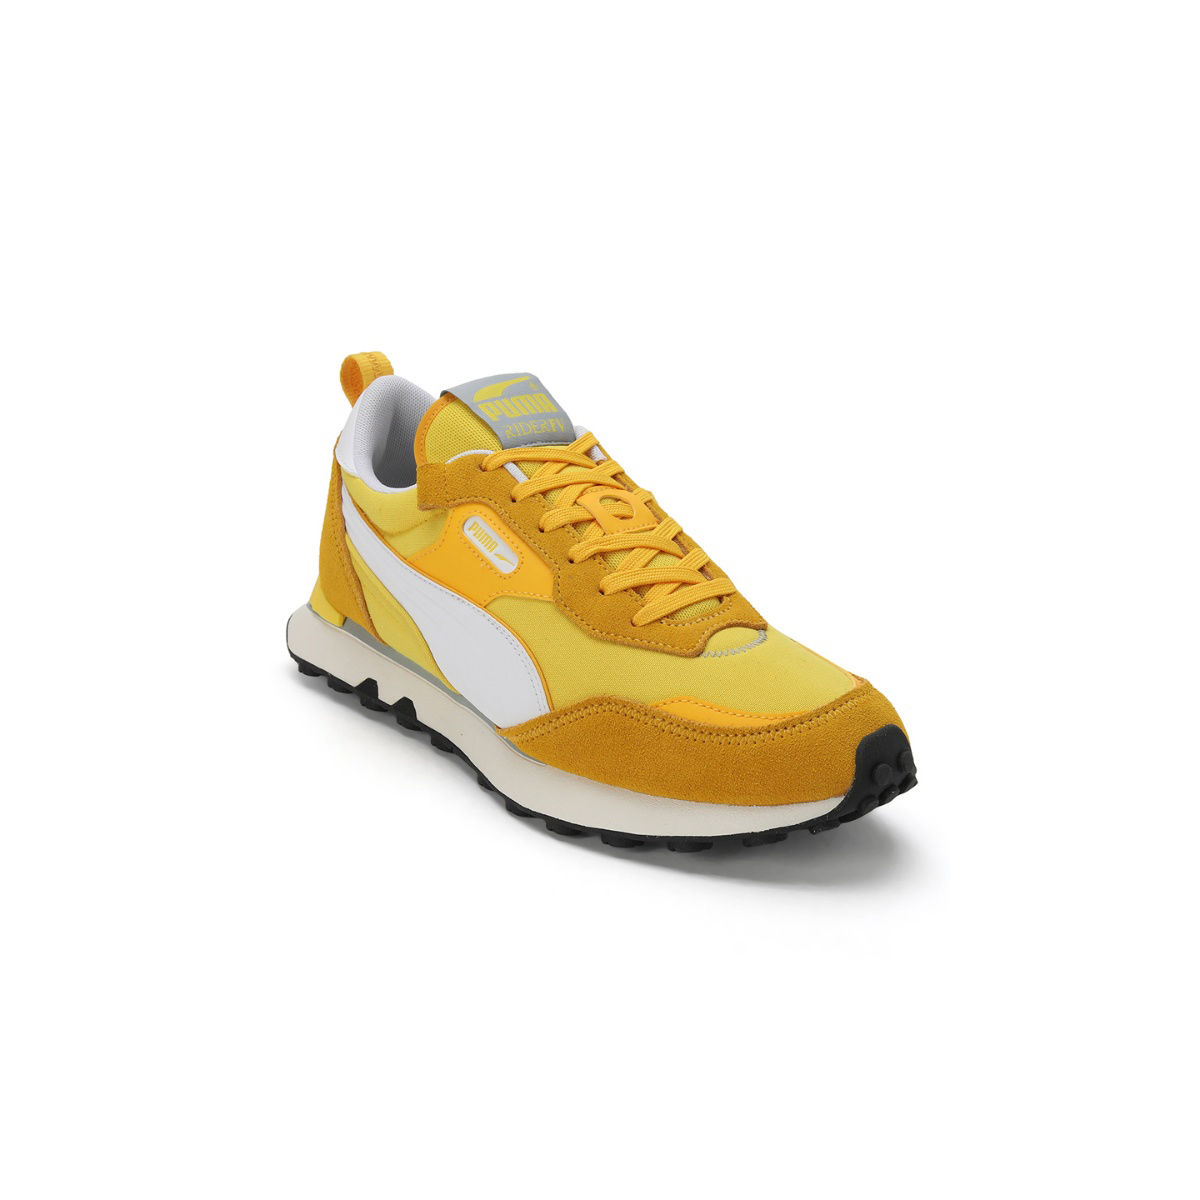 Buy Puma Kids Grey & Yellow Casual Sneakers for at Best Price @ Tata CLiQ